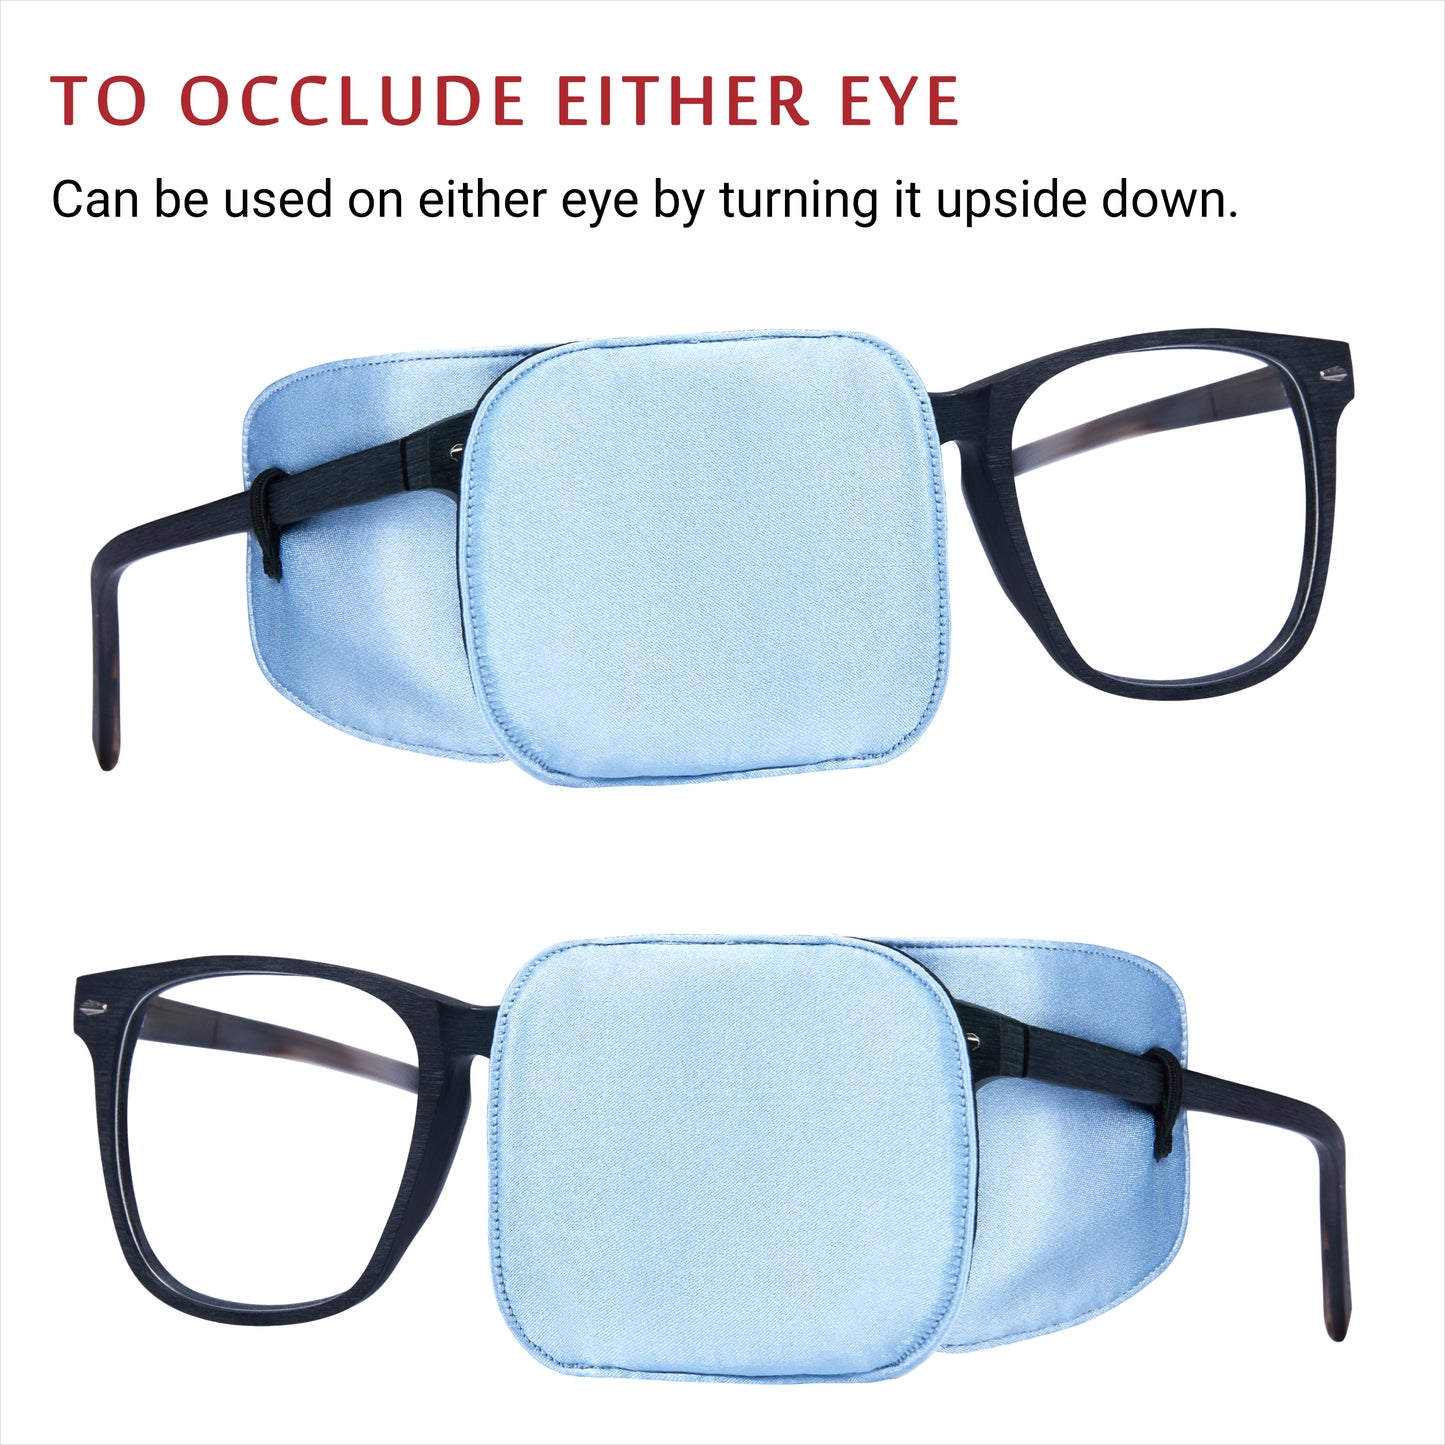 Silk Eye Patch for Glasses (Large, Sky Blue)